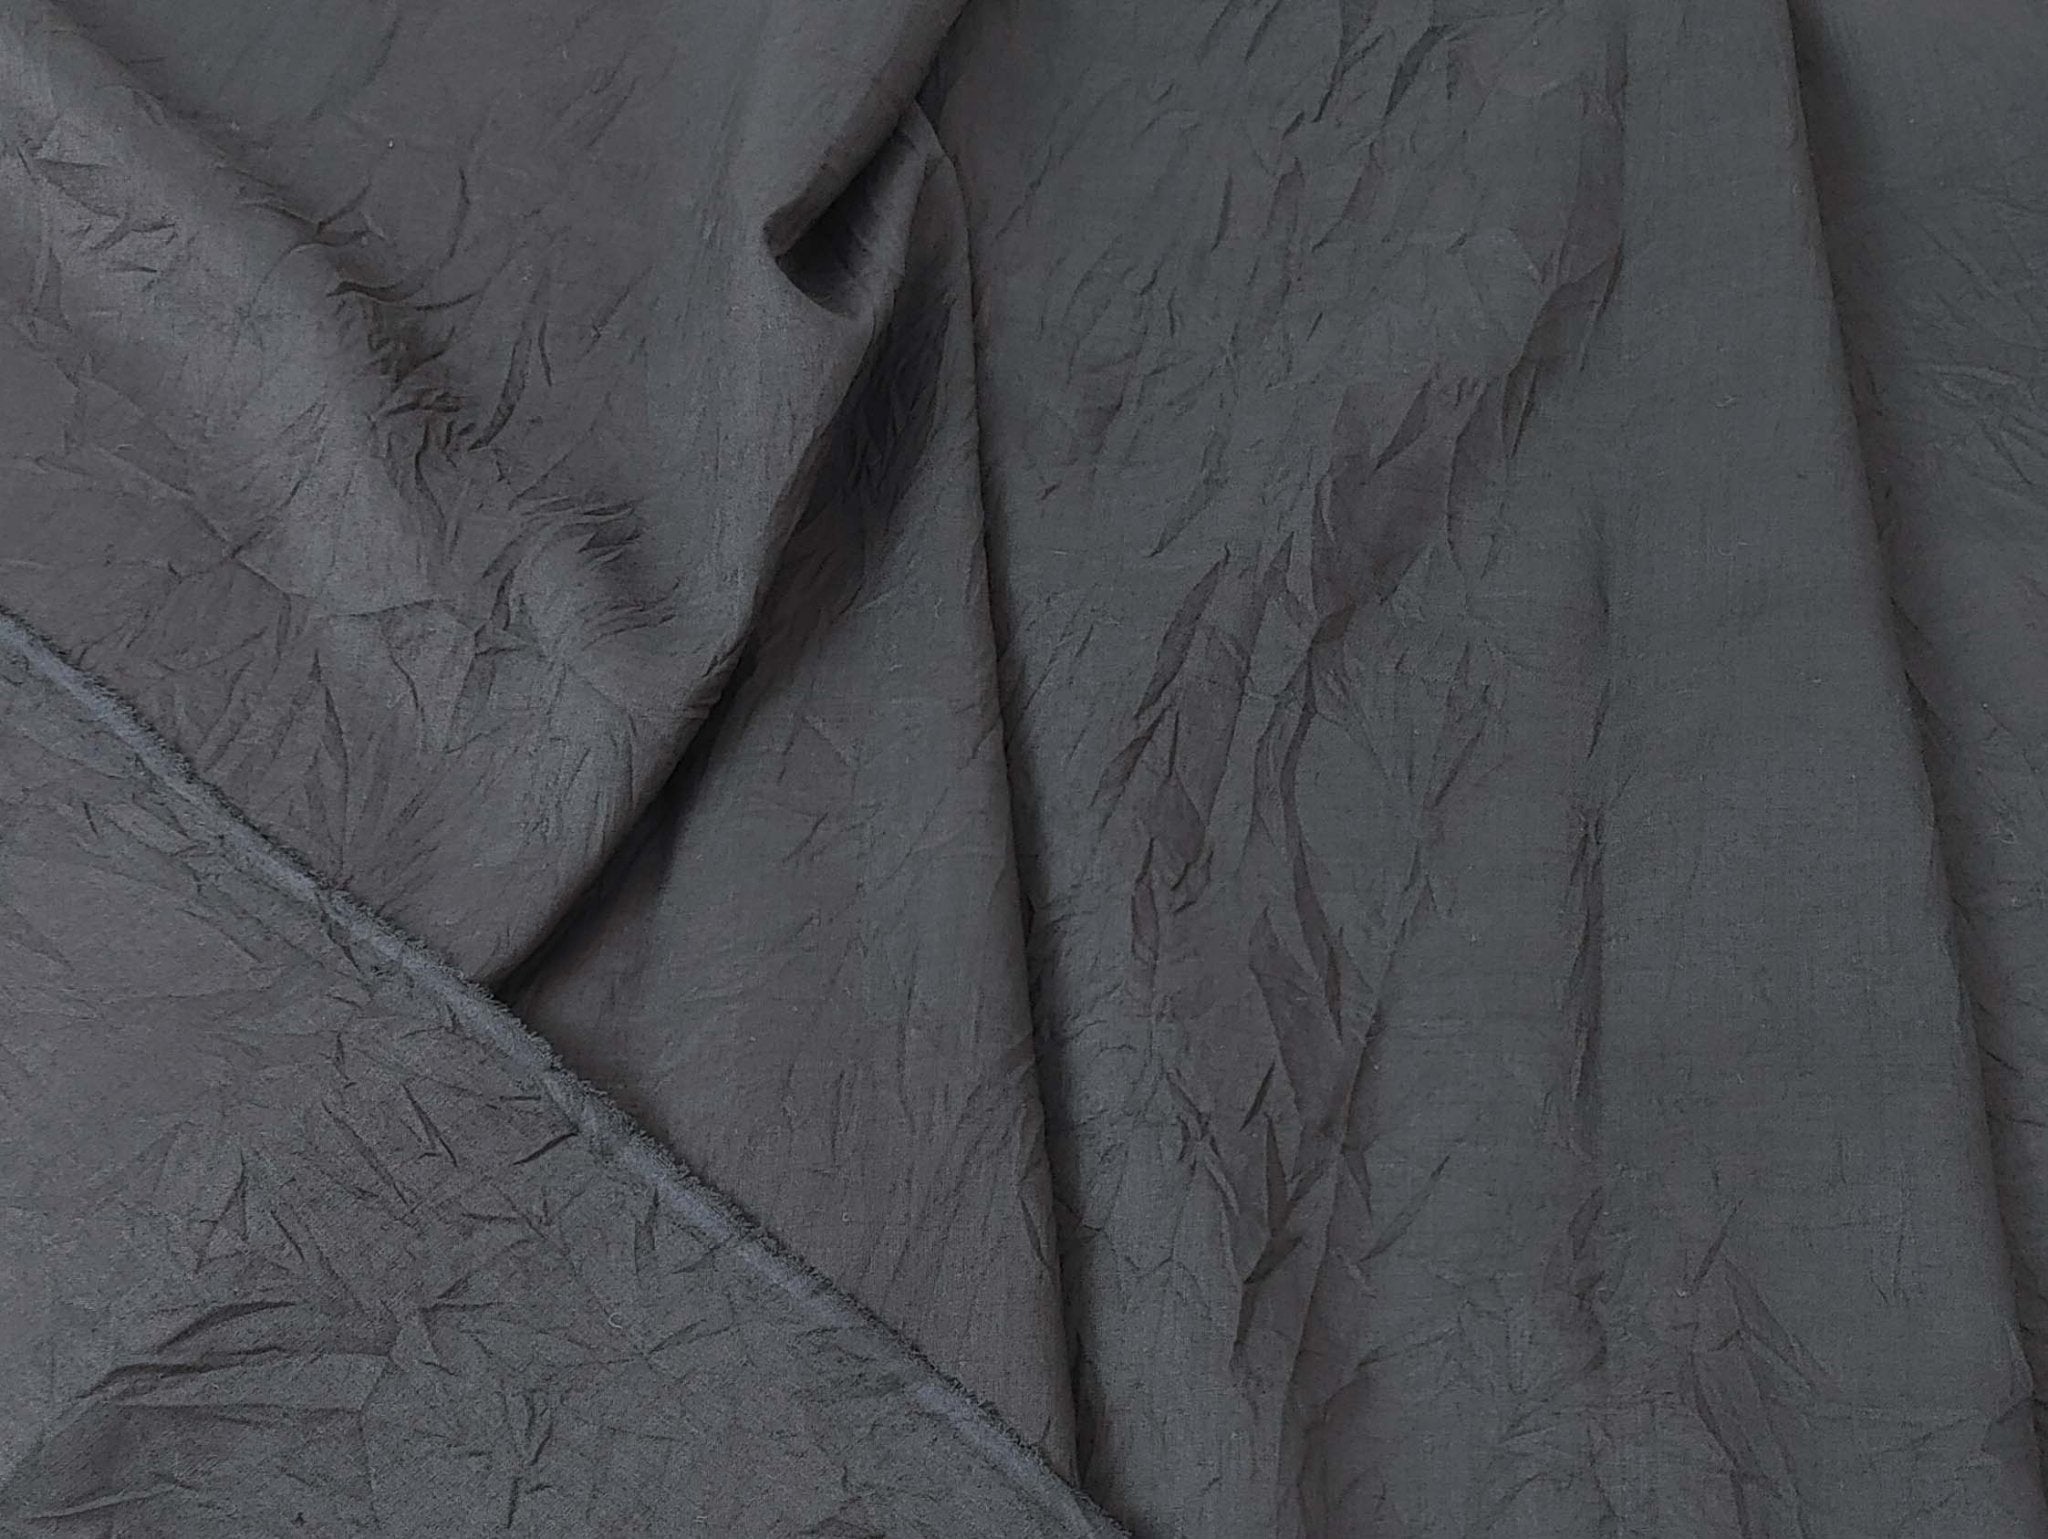 Ramie Polyester Fabric - Black Color with Crease Wrinkle Effect, Lightweight 7863 - The Linen Lab - Black